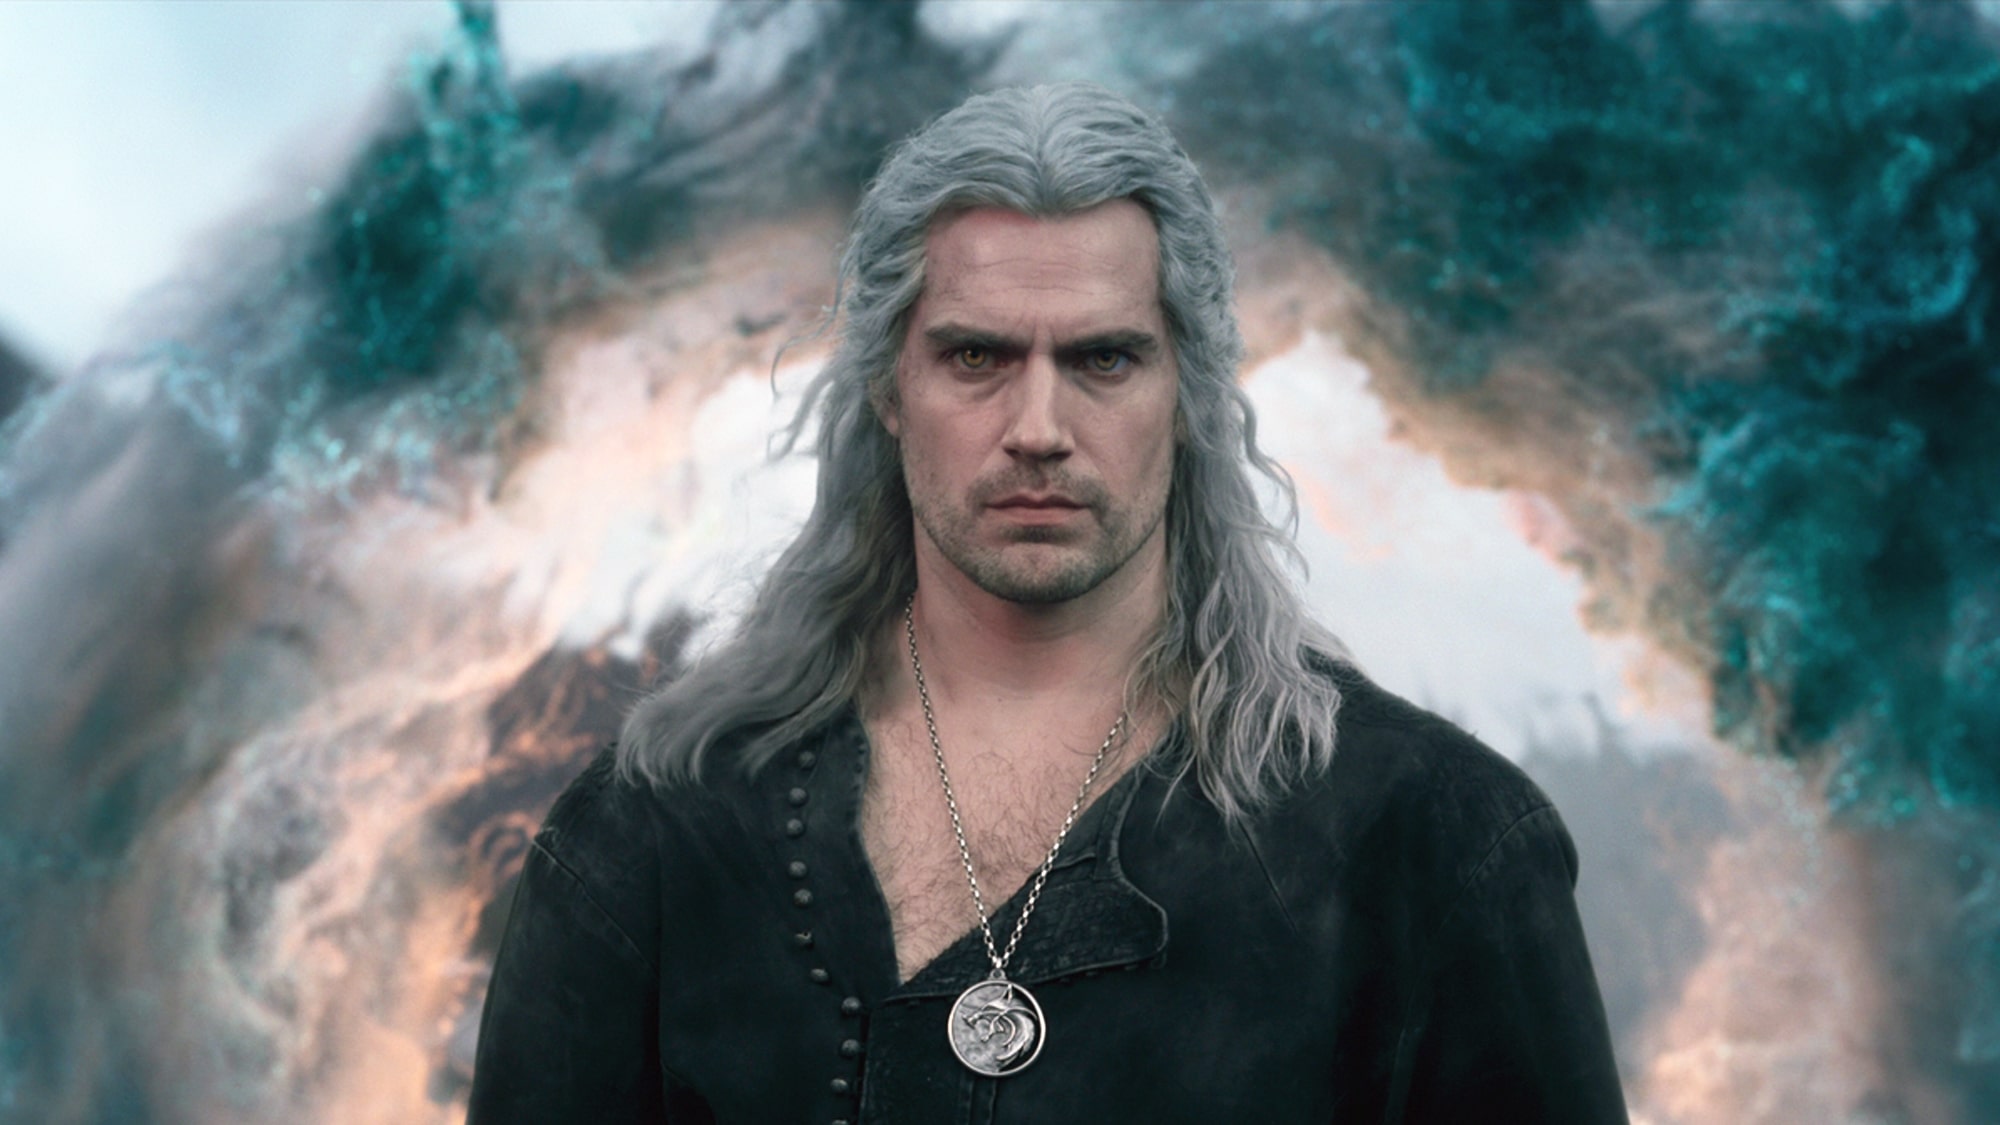 The Witcher' Season 3, Part 2 Ending, Explained: What Happened?